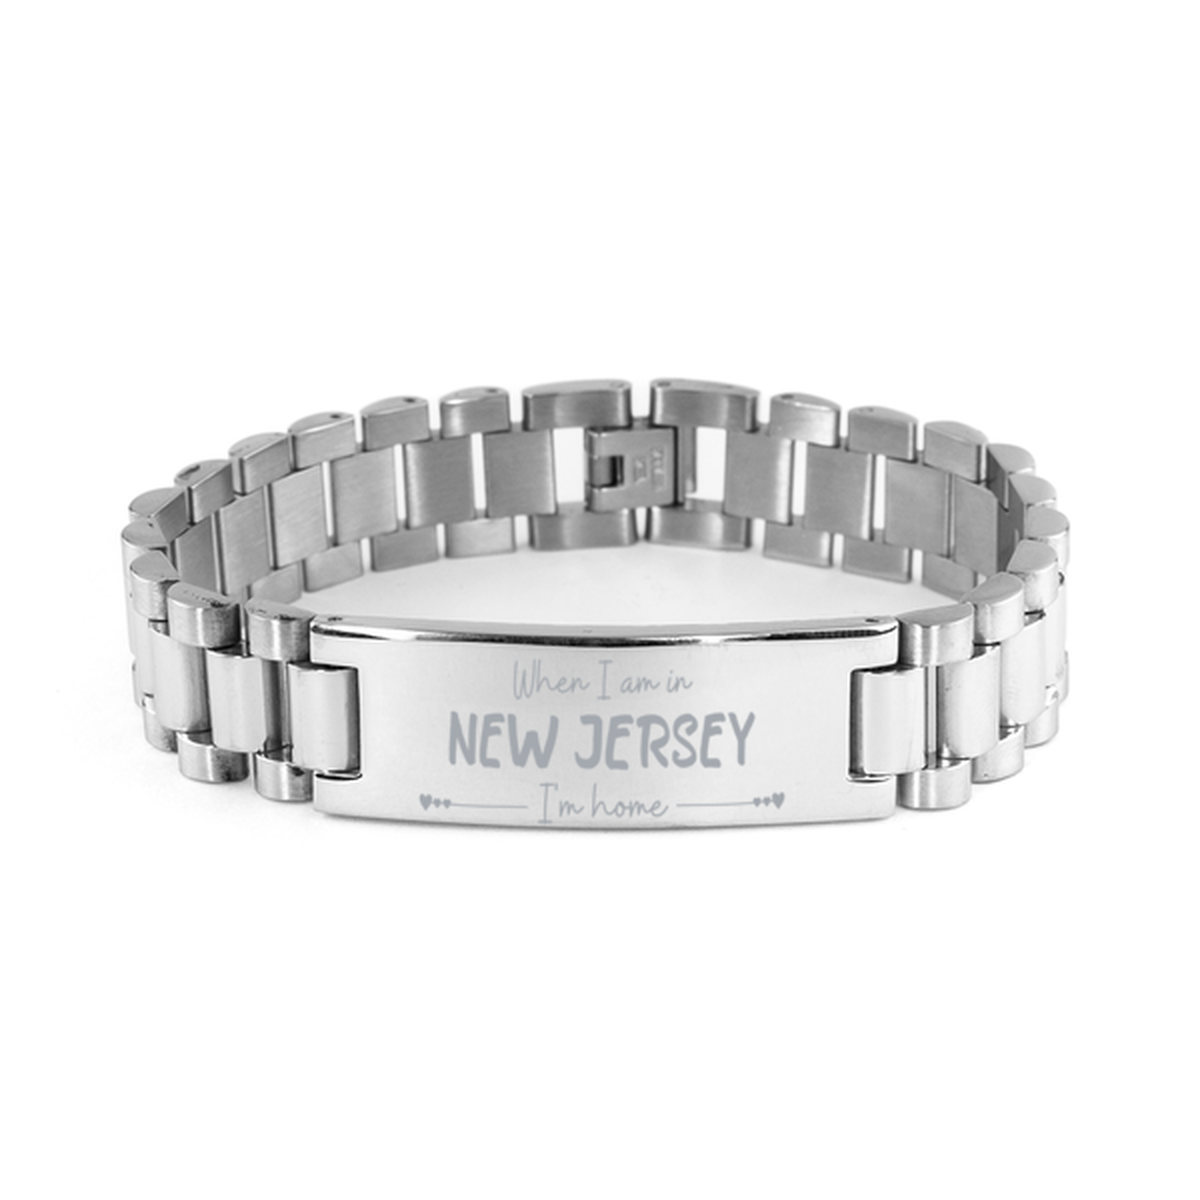 When I am in New Jersey I'm home Ladder Stainless Steel Bracelet, Cheap Gifts For New Jersey, State New Jersey Birthday Gifts for Friends Coworker